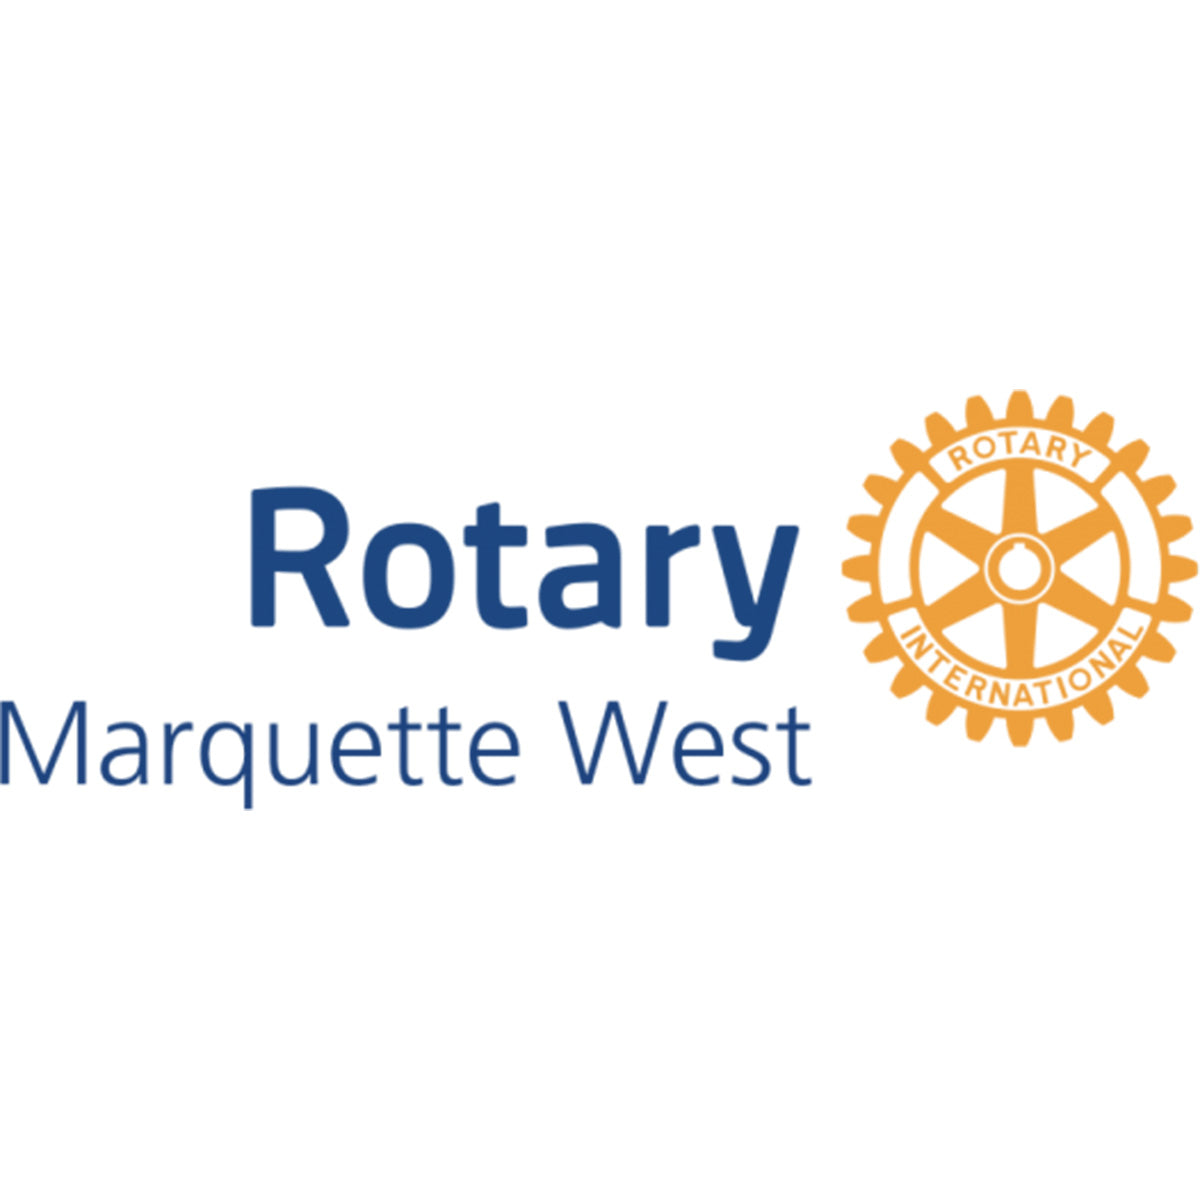 Marquette West Rotary Club